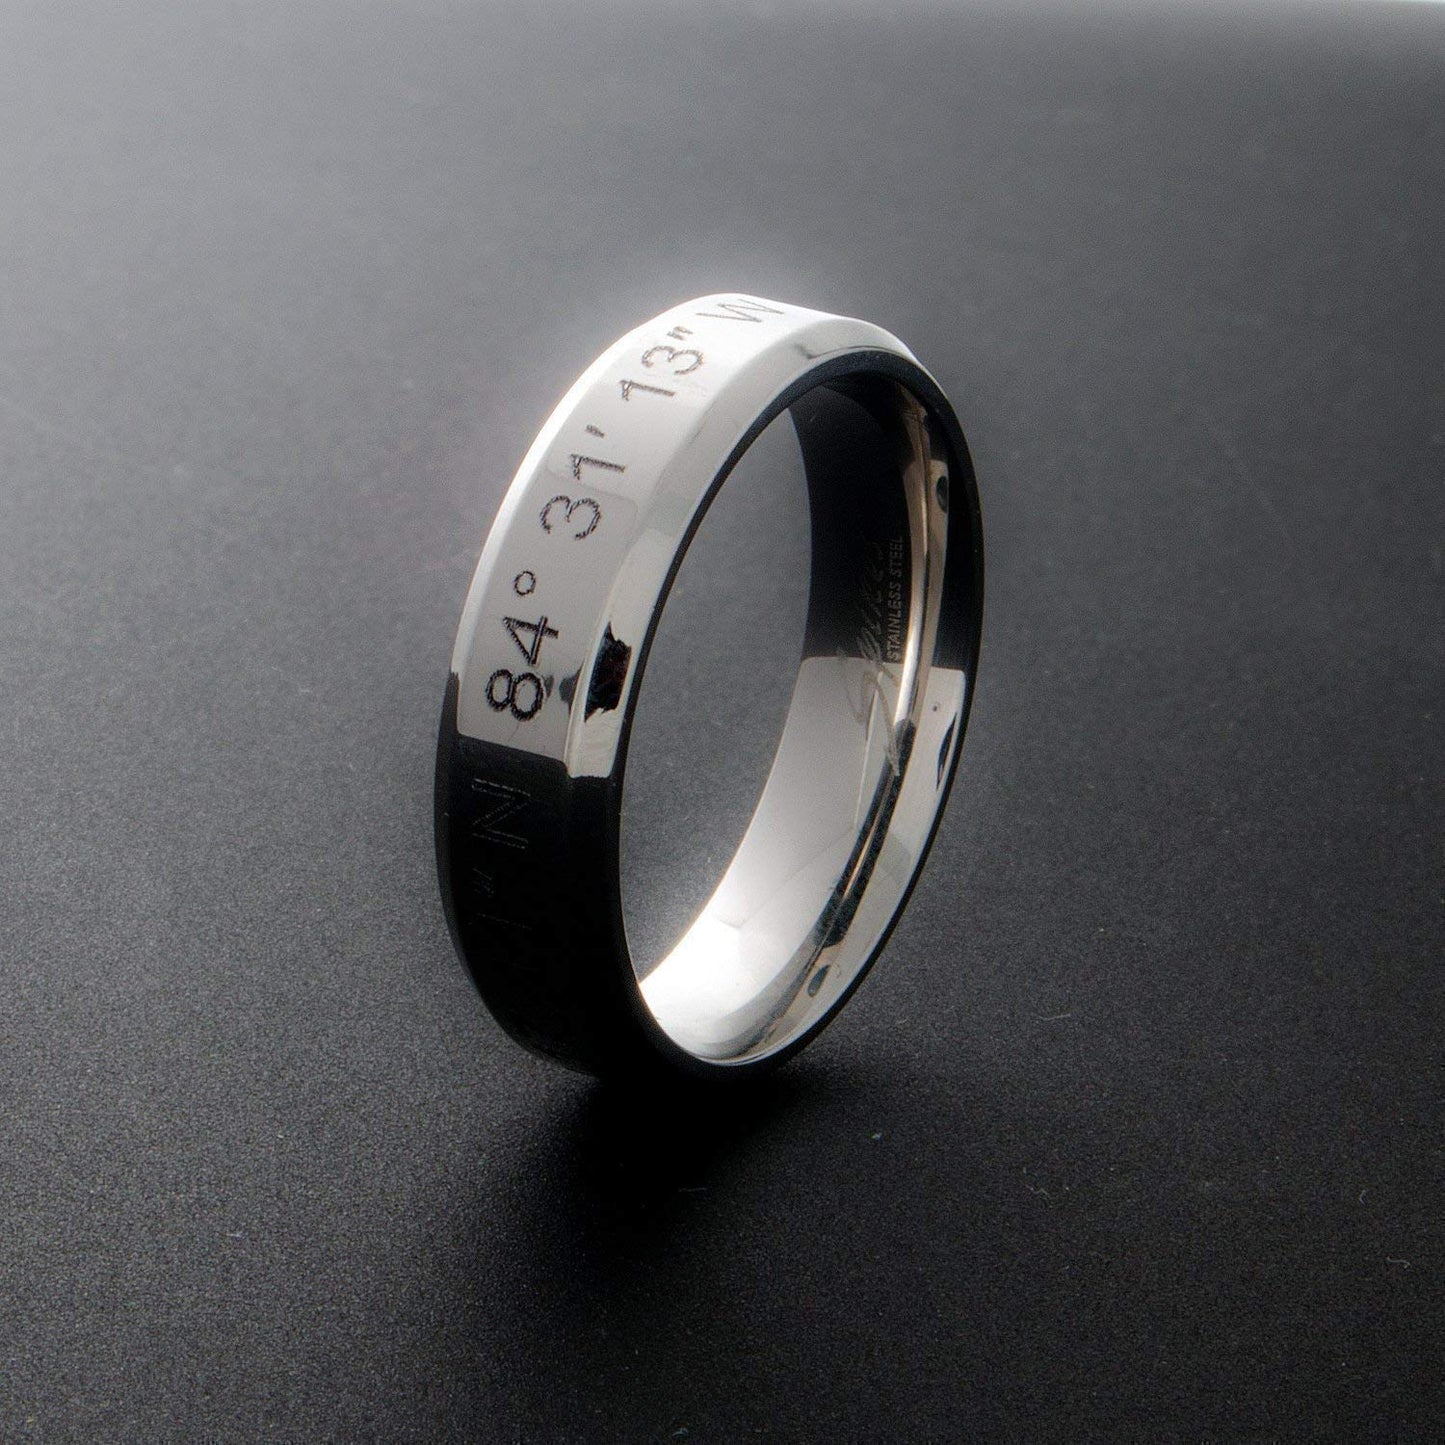 Custom Engraved Ring With Coordinates Unisex Jewelry